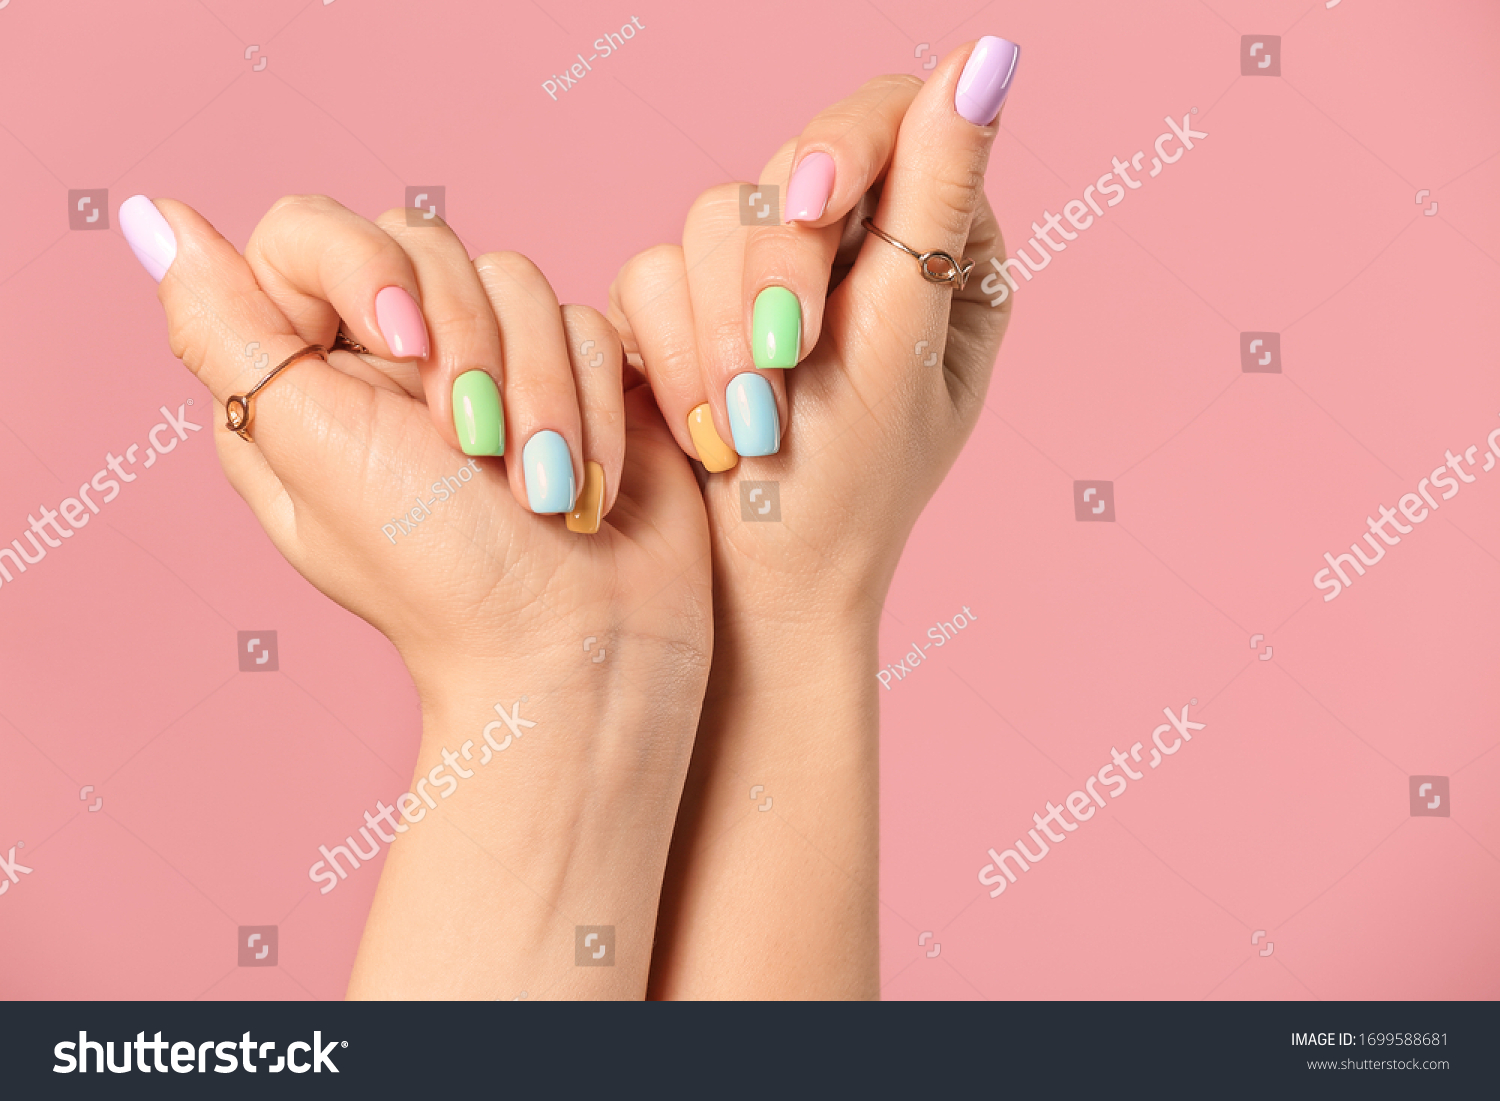 Hands of young woman with beautiful manicure on color background #1699588681